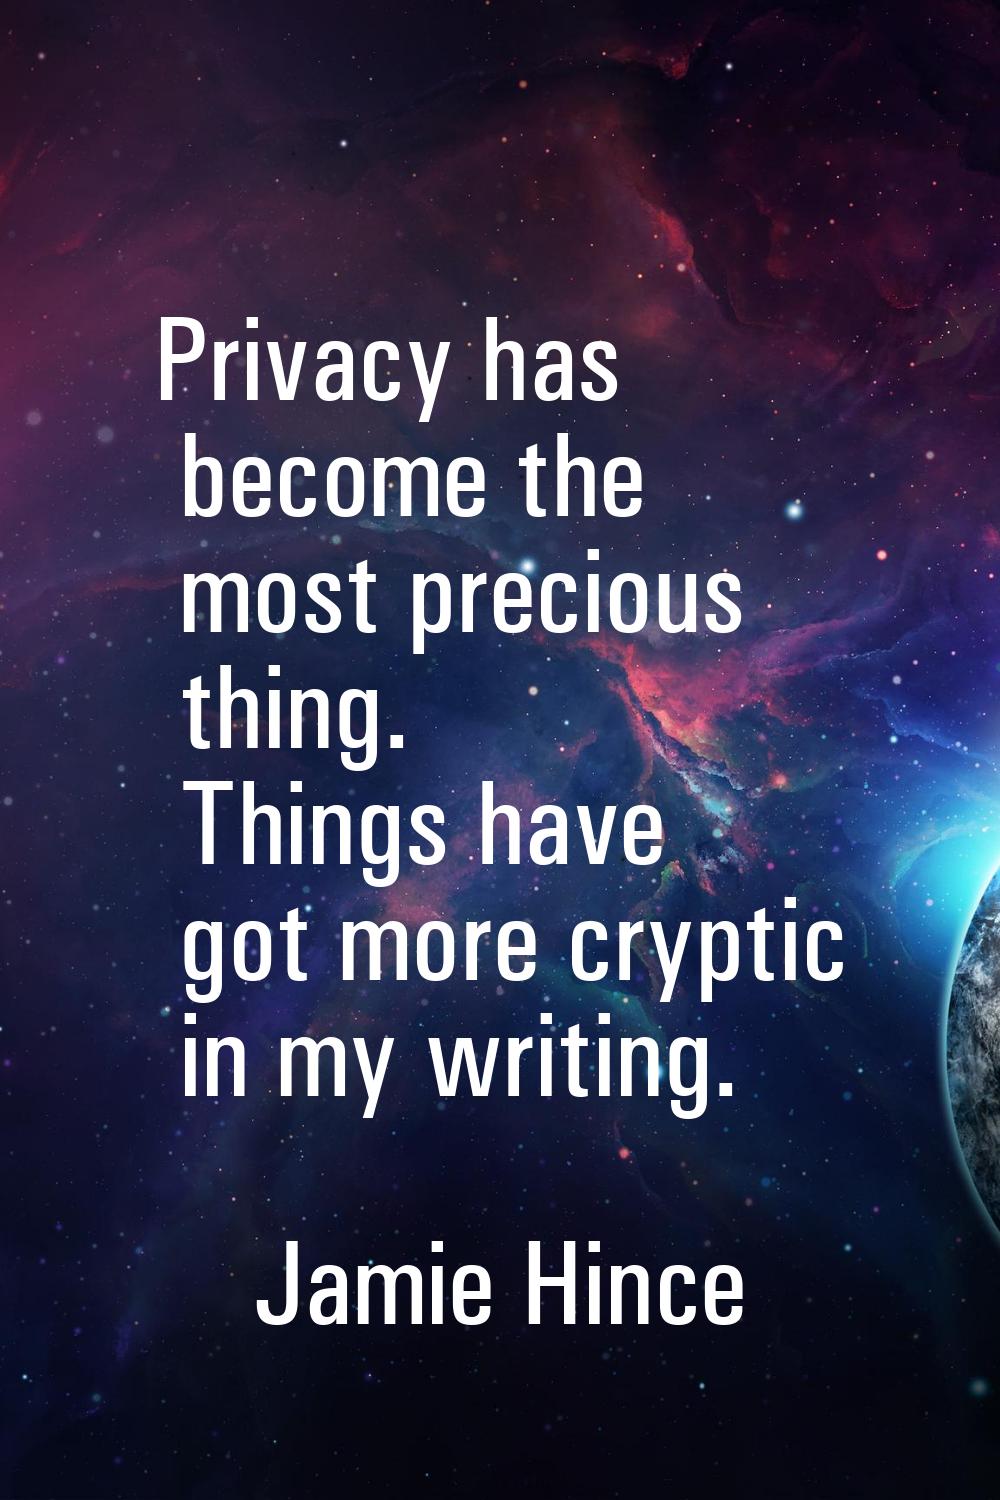 Privacy has become the most precious thing. Things have got more cryptic in my writing.